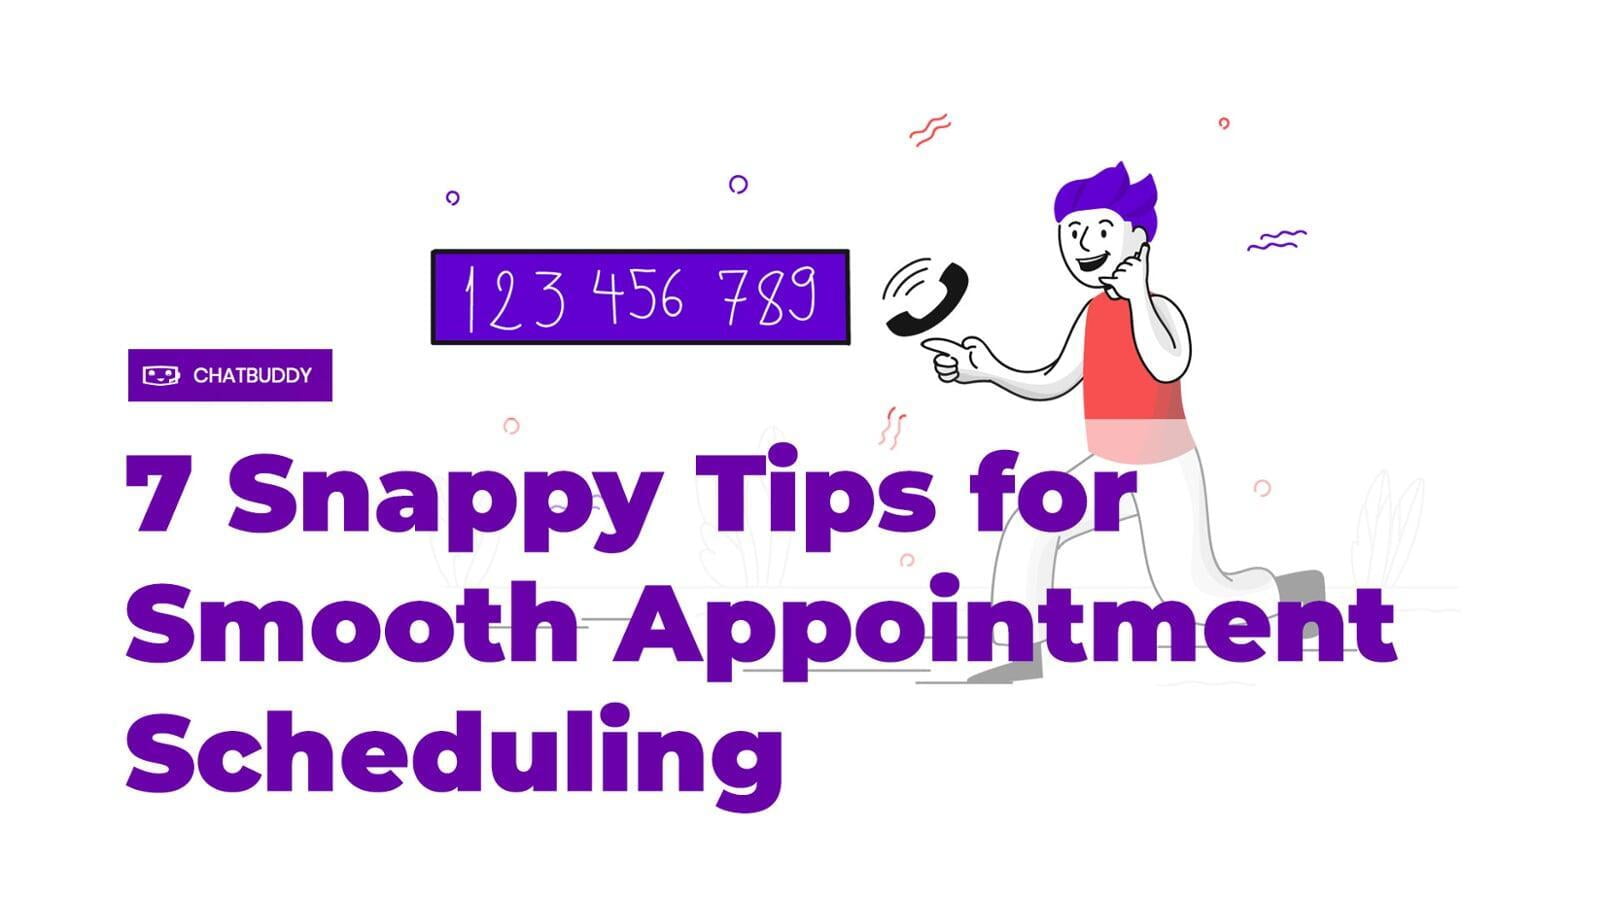 7 Snappy Tips for Smooth Appointment Scheduling